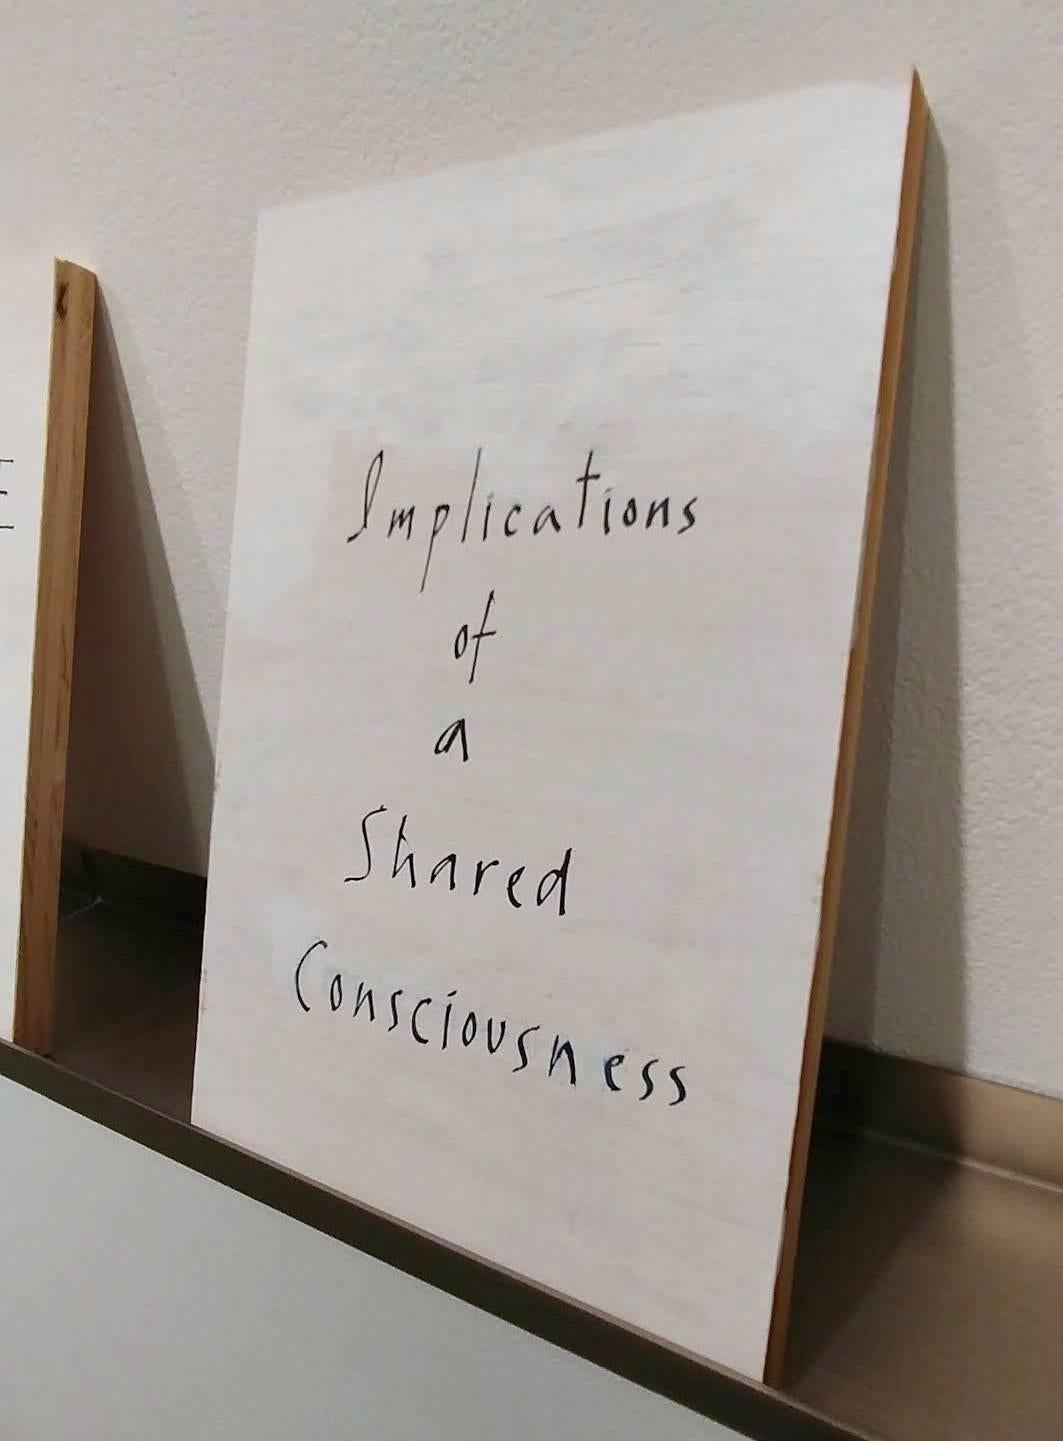 Ruth Green's Implications of a Shared Consciousness is created with gesso on plywood with black acrylic artists ink. The piece is primarily white and black.

Ruth Greene’s “books” are an ongoing conceptual series that are seductively painted on